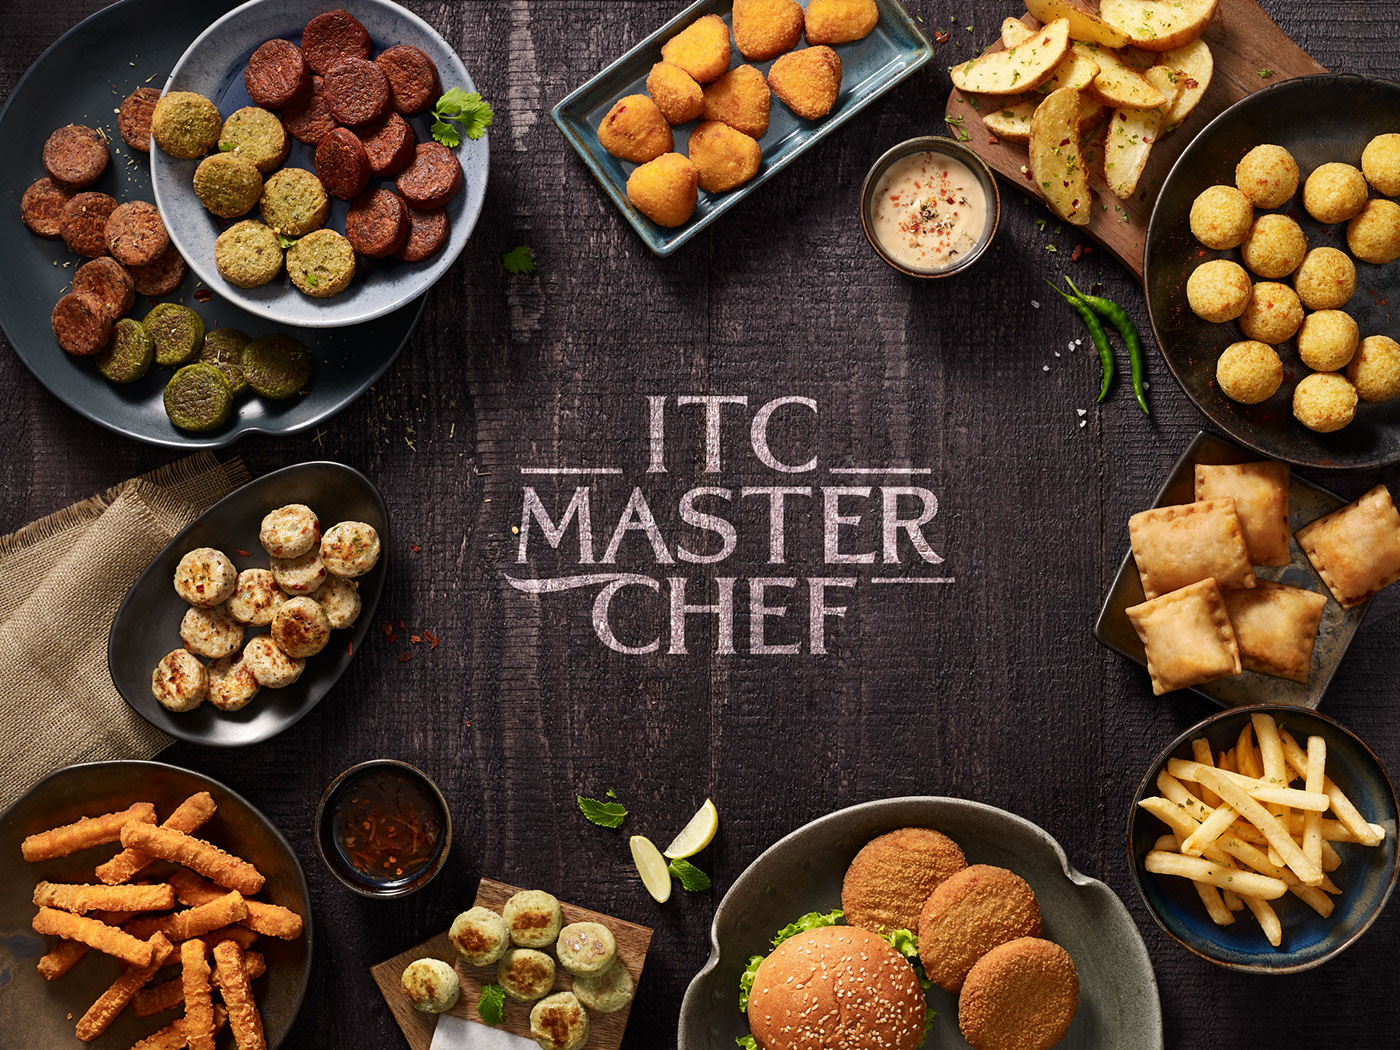 food photography food photographer food styling ITC master chef frozen food Kebabs Fries